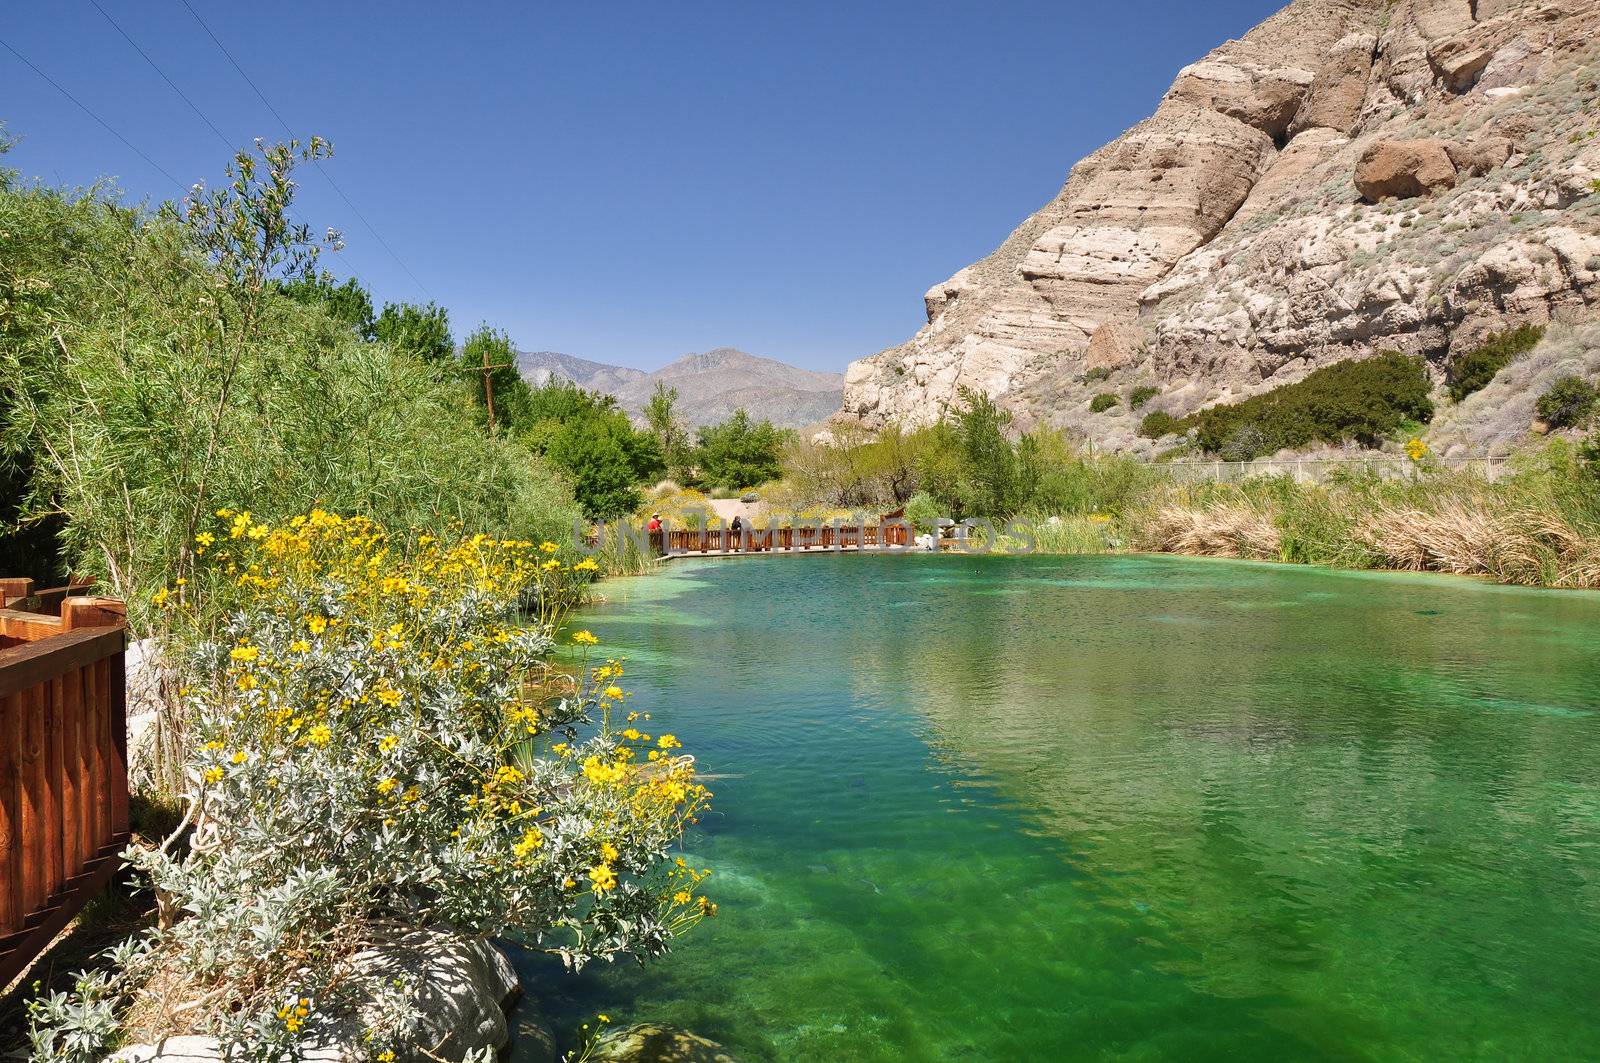 A colorful pond creates a desert oasis near the town of Palm Springs, California.